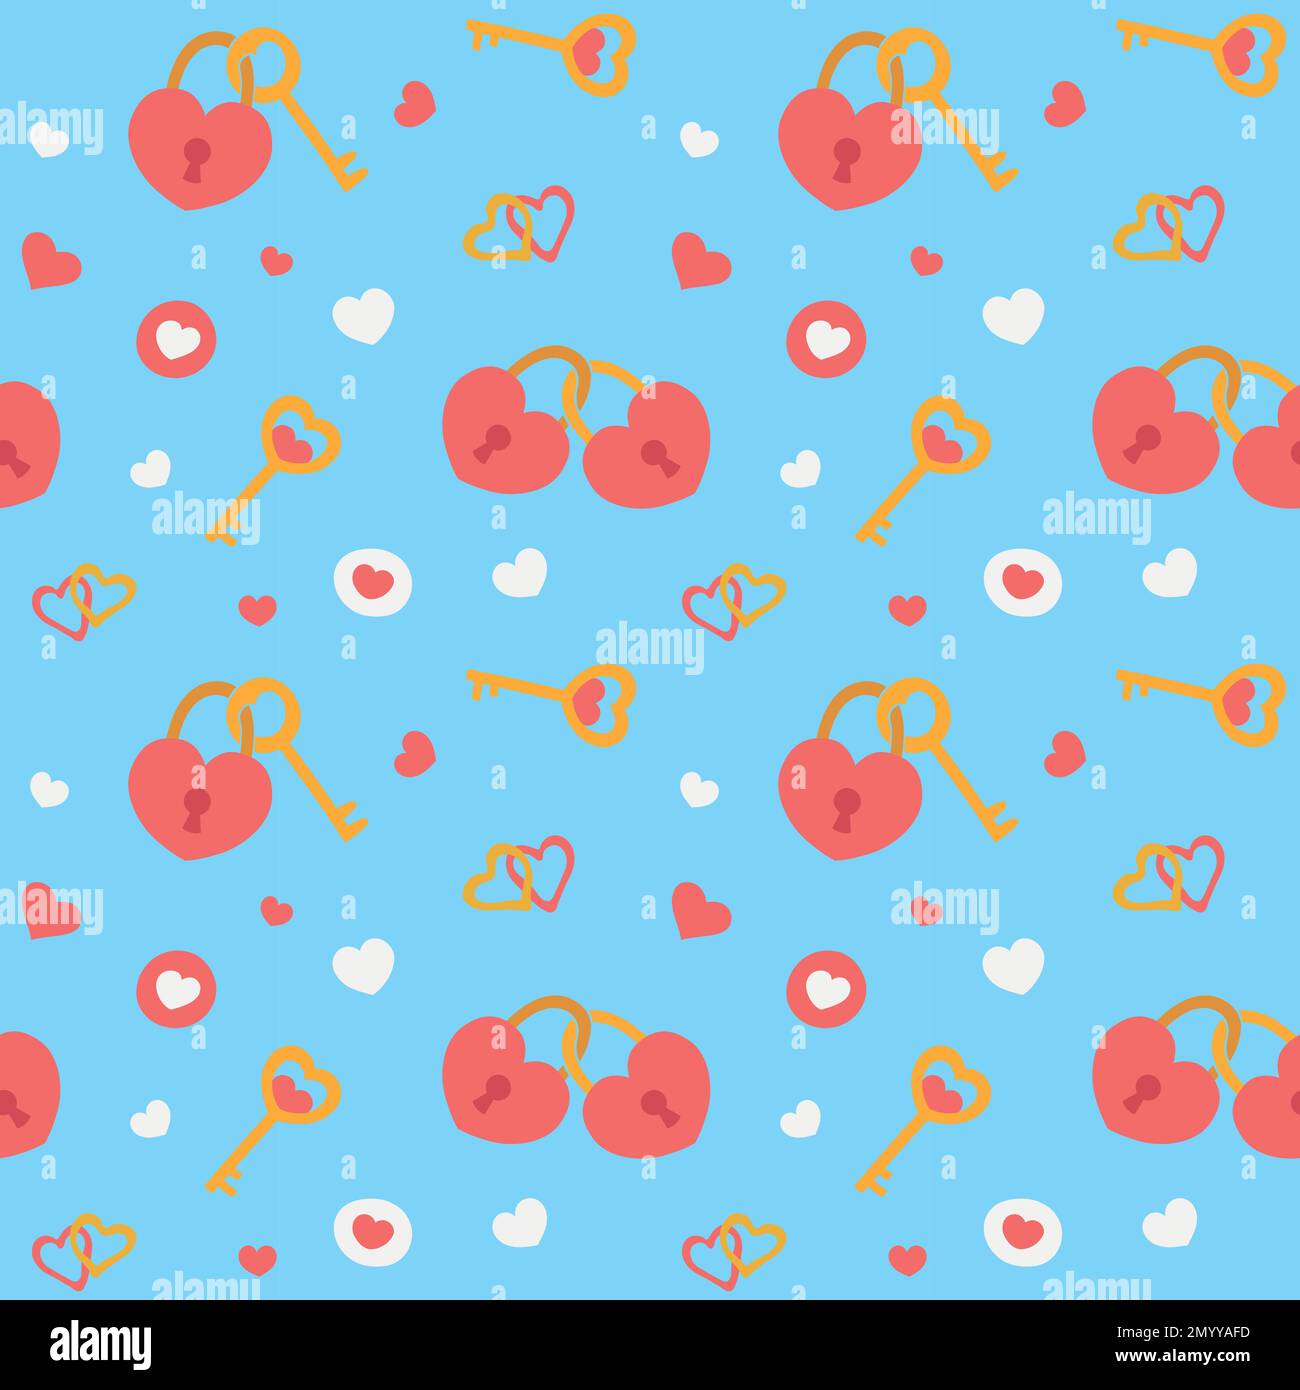 Colorful repetitive pattern background of love and relationship, Valentine's day related love locks and keys, made of simple vector illustrations. Stock Vector